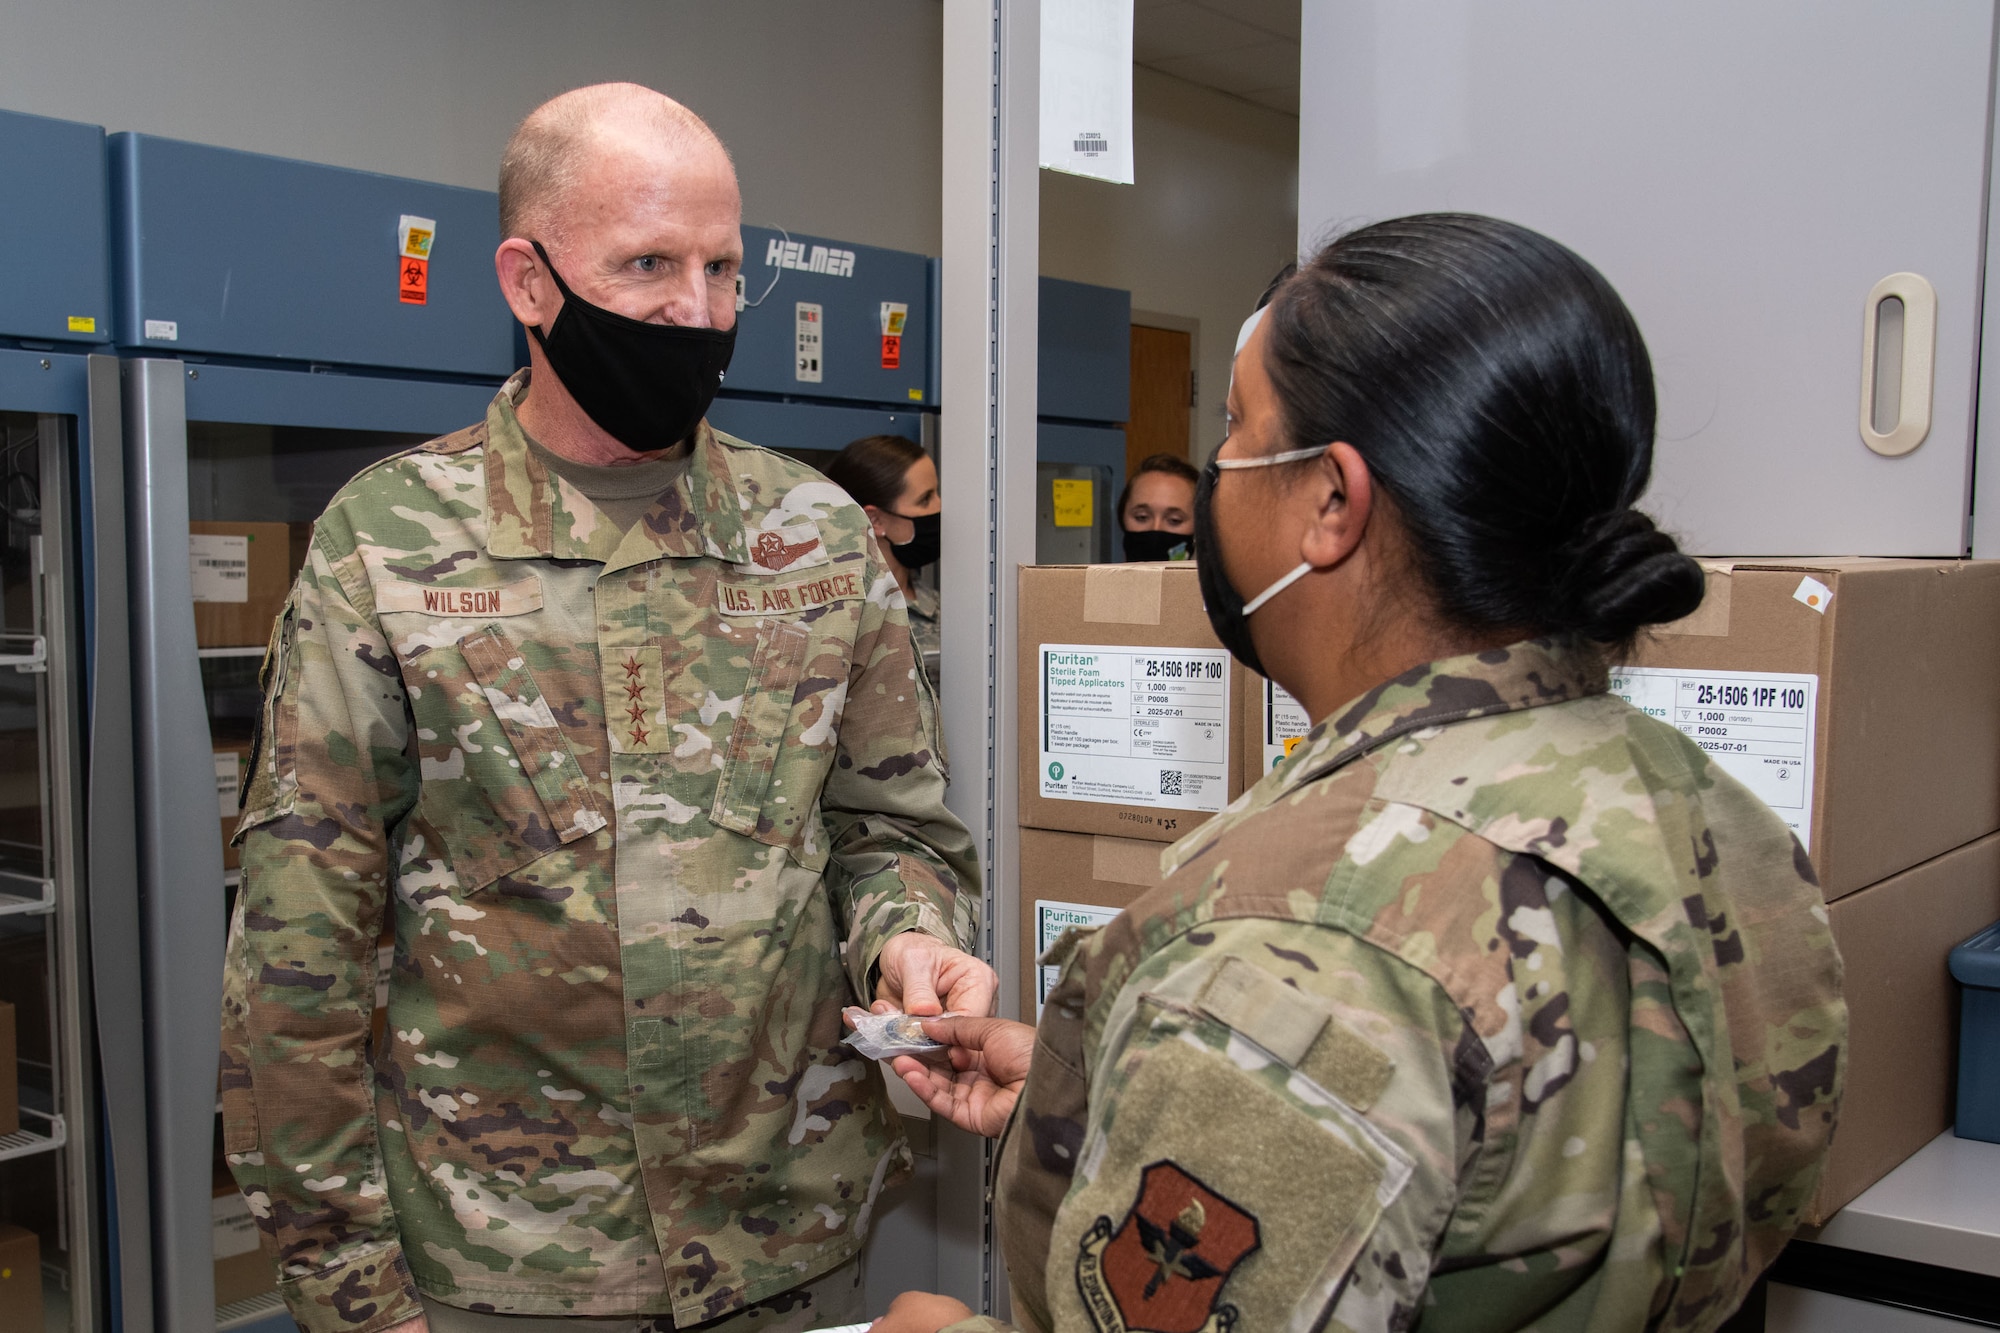 Vice Chief of Staff of the Air Force Gen. Stephen W. Wilson presents a decorative coin to Master Sgt. Simone Moonsammy-Robinson to show appreciation for her contribution to the COVID-19 response during a visit to the 42nd Medical Group, Oct. 22, 2020, Maxwell Air Force Base, Alabama. Moonsammy-Robinson developed a plan to make the packaging and shipment of COVID-19 tests more efficient and standardized. (U.S. Air Force photo by William Birchfield)